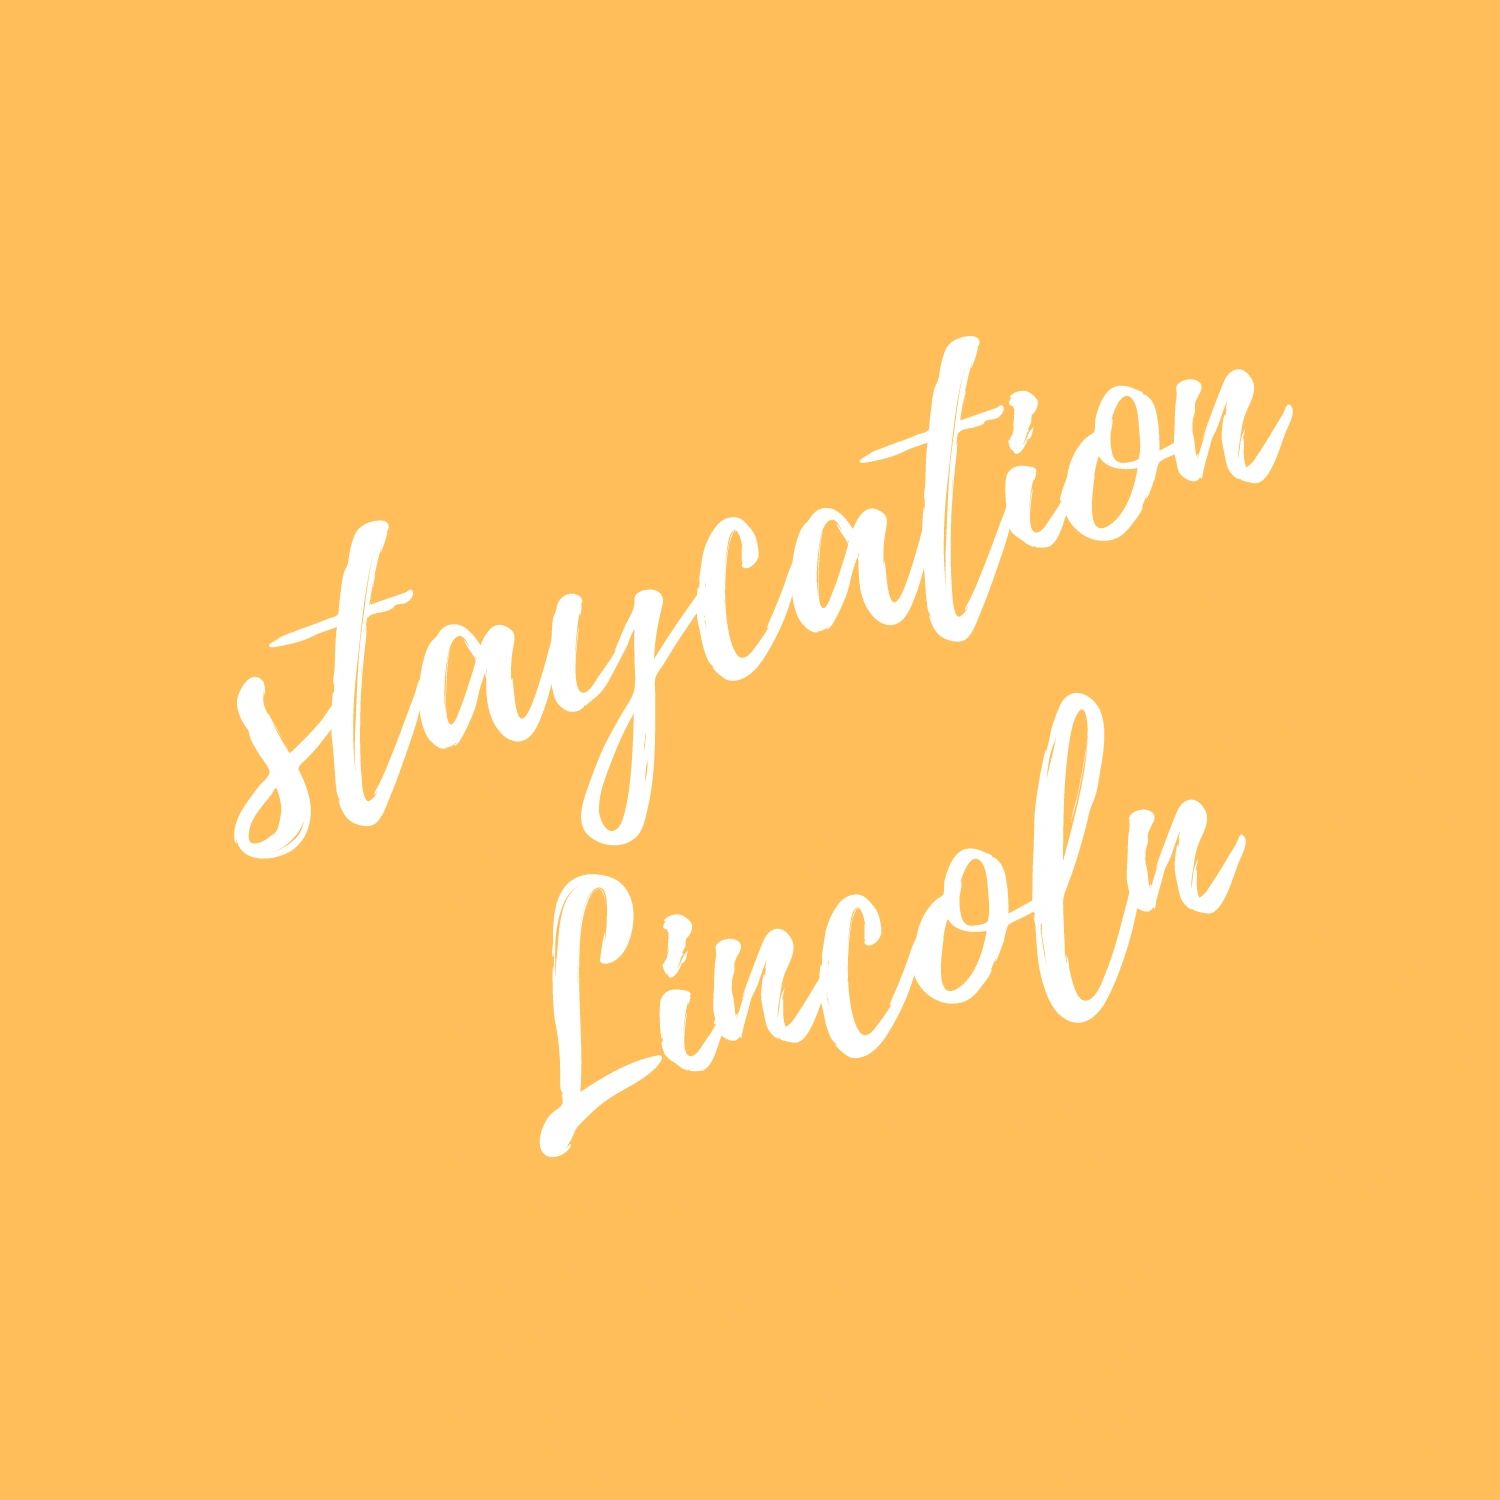 staycation Lincoln